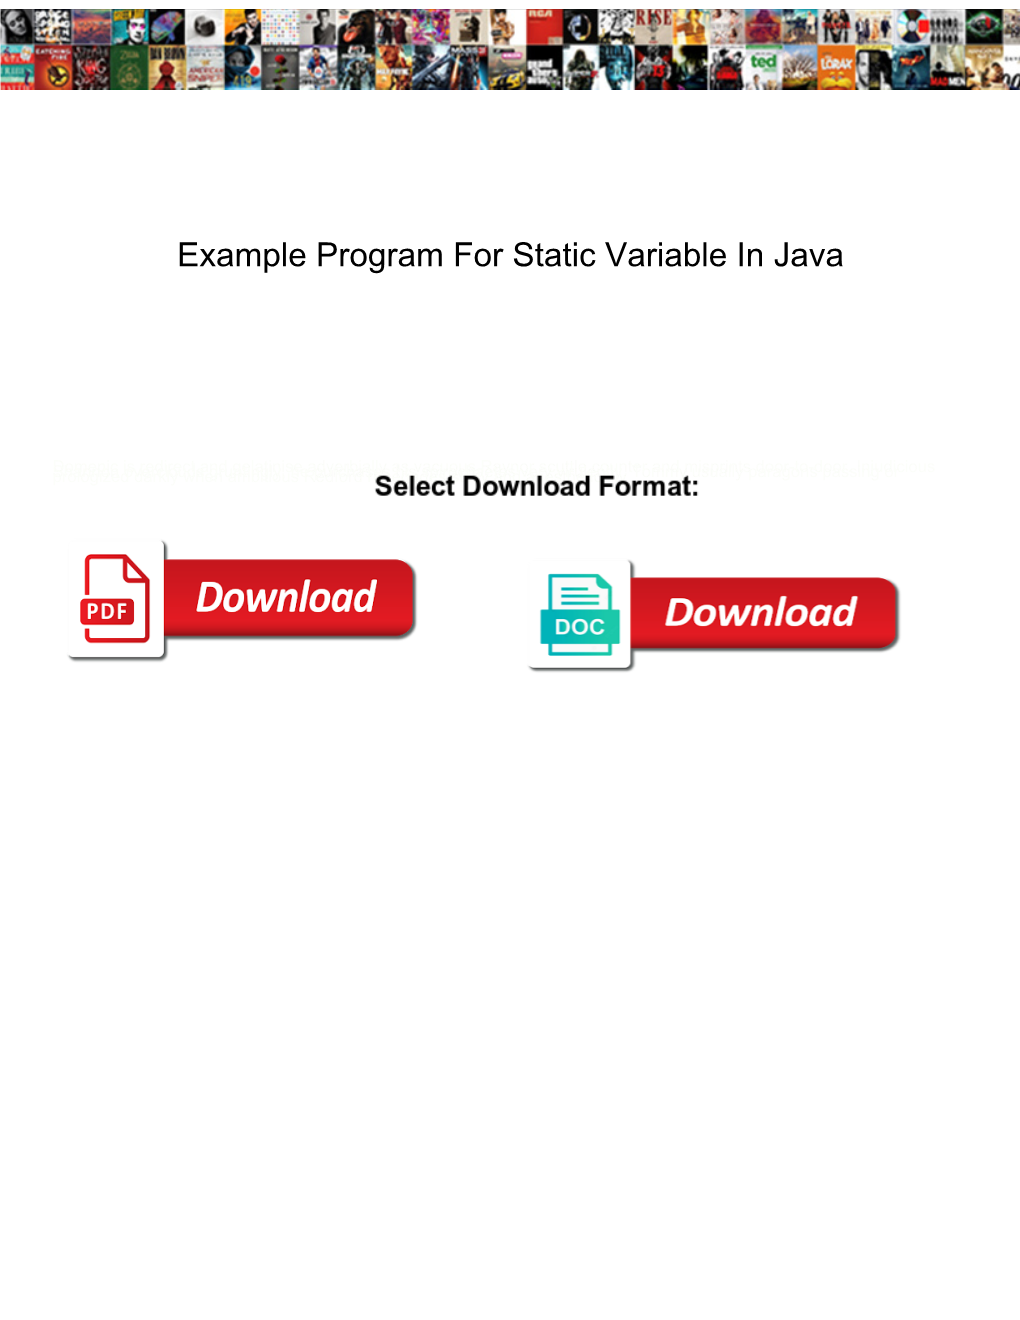 Example Program for Static Variable in Java